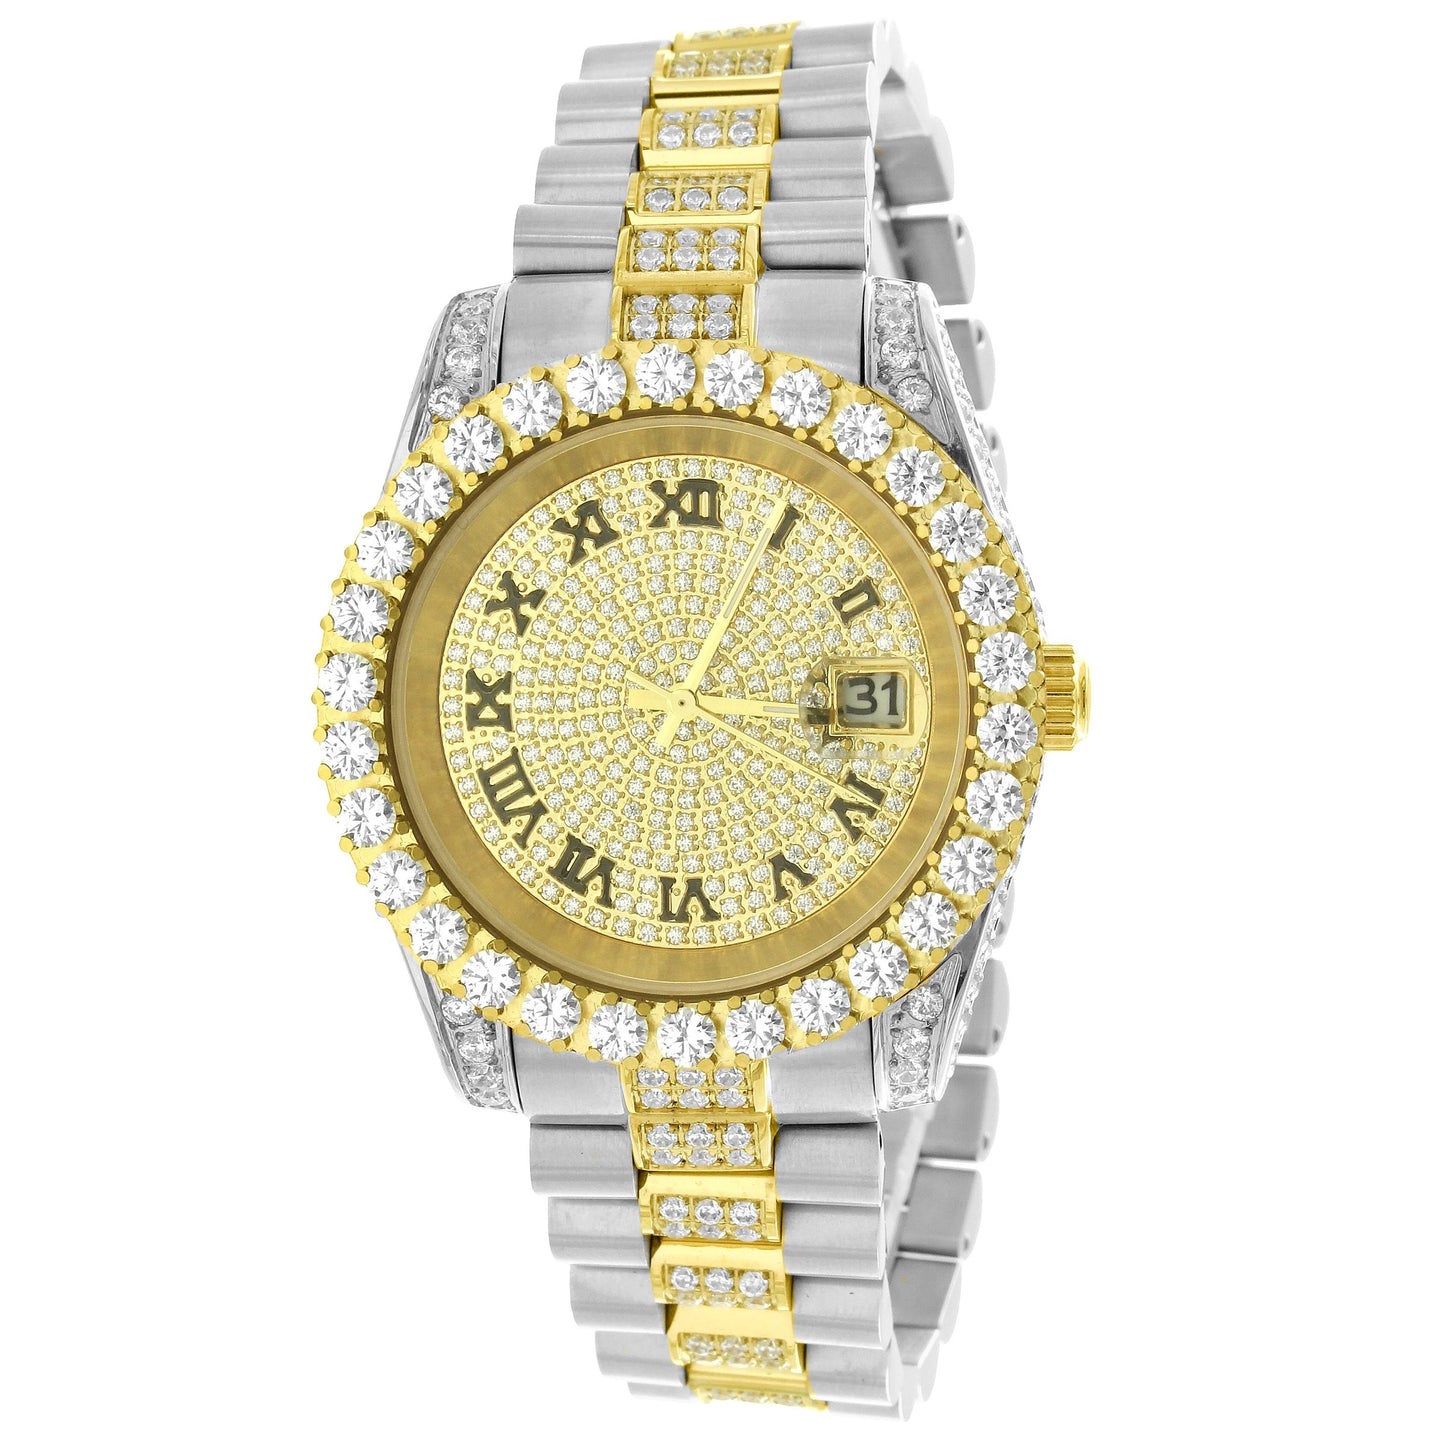 Stainless Steel Two Tone Gold Solitaire Bezel Roman Dial Watch